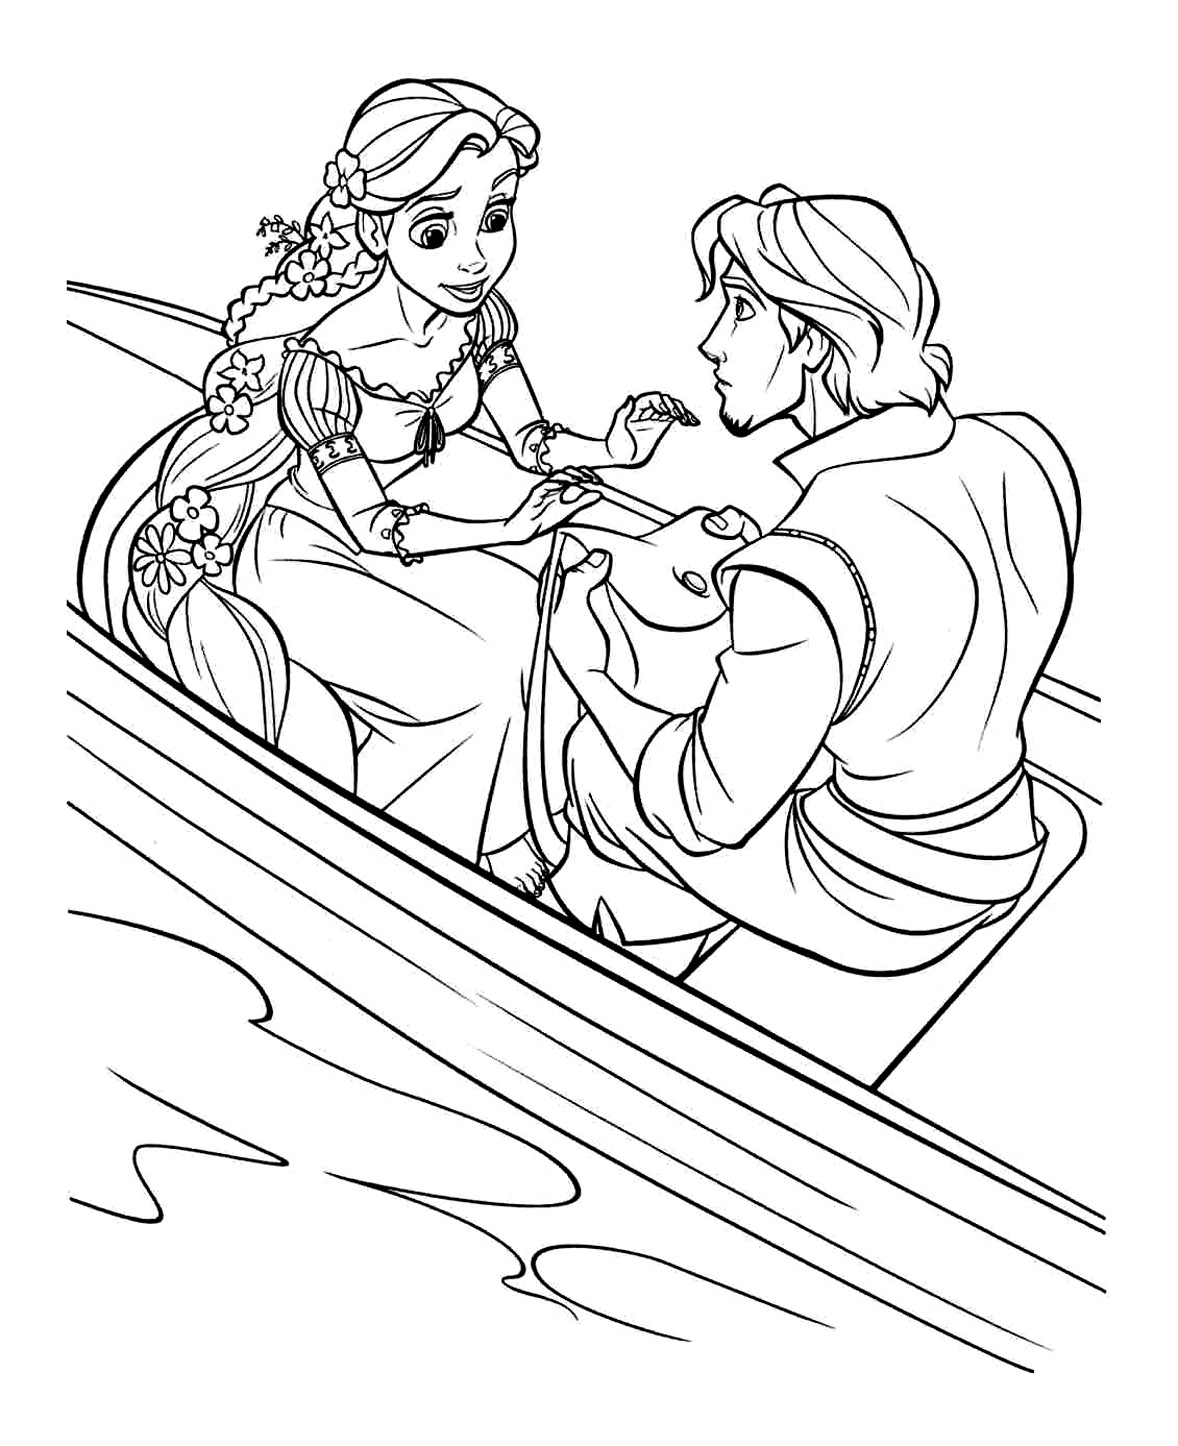 Simple Tangled coloring page to print and color for free (Disney)